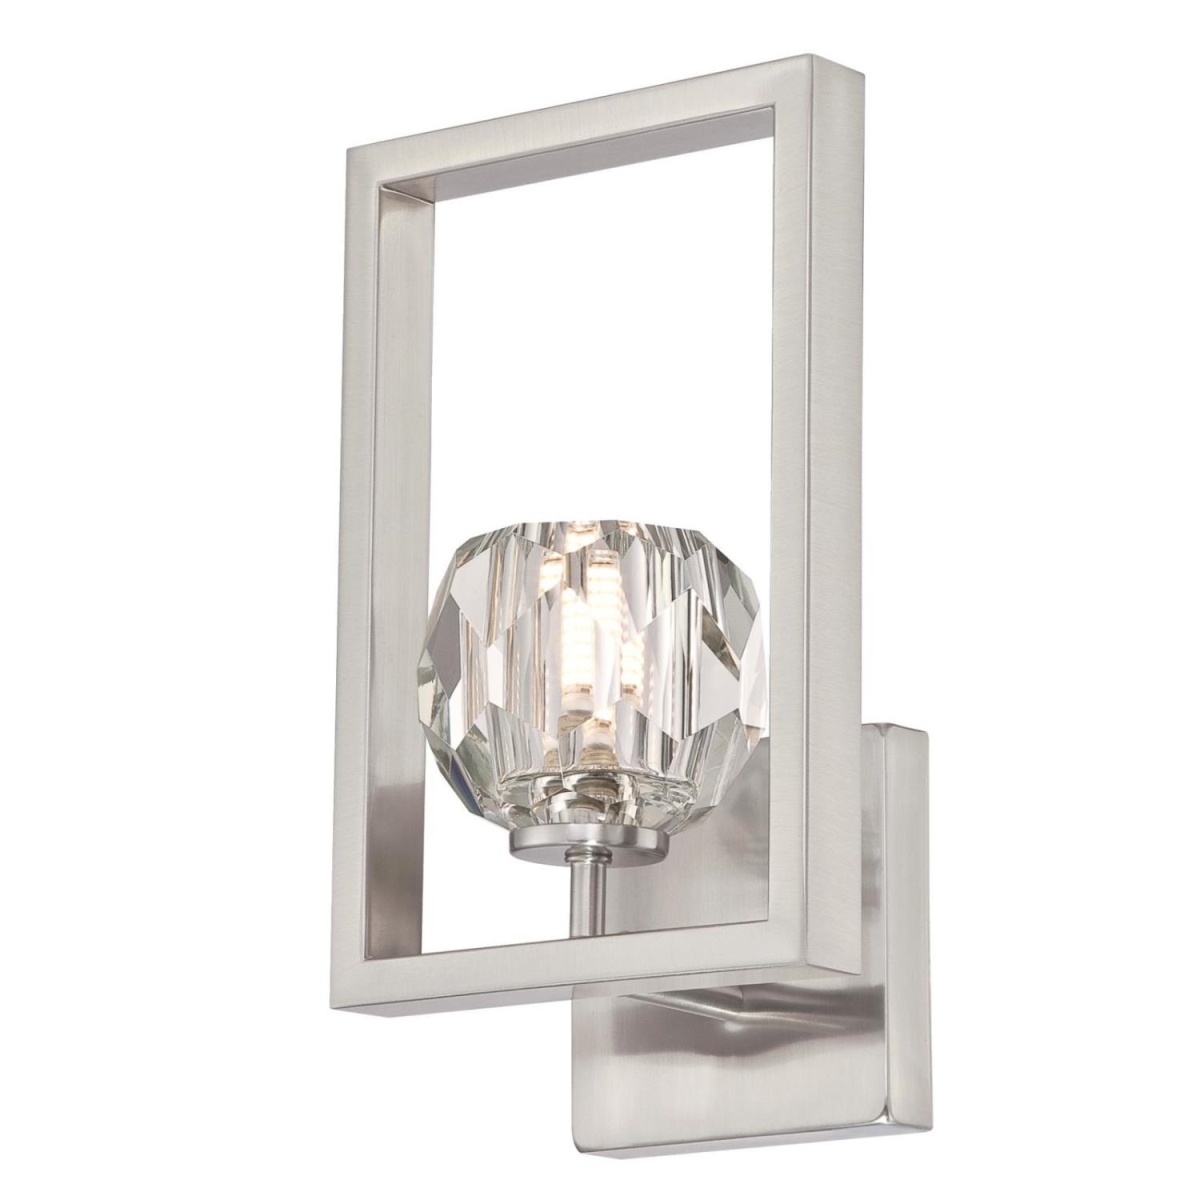 6367500 1 Light Led Wall Fixture With Crystal Glass - Brushed Nickel